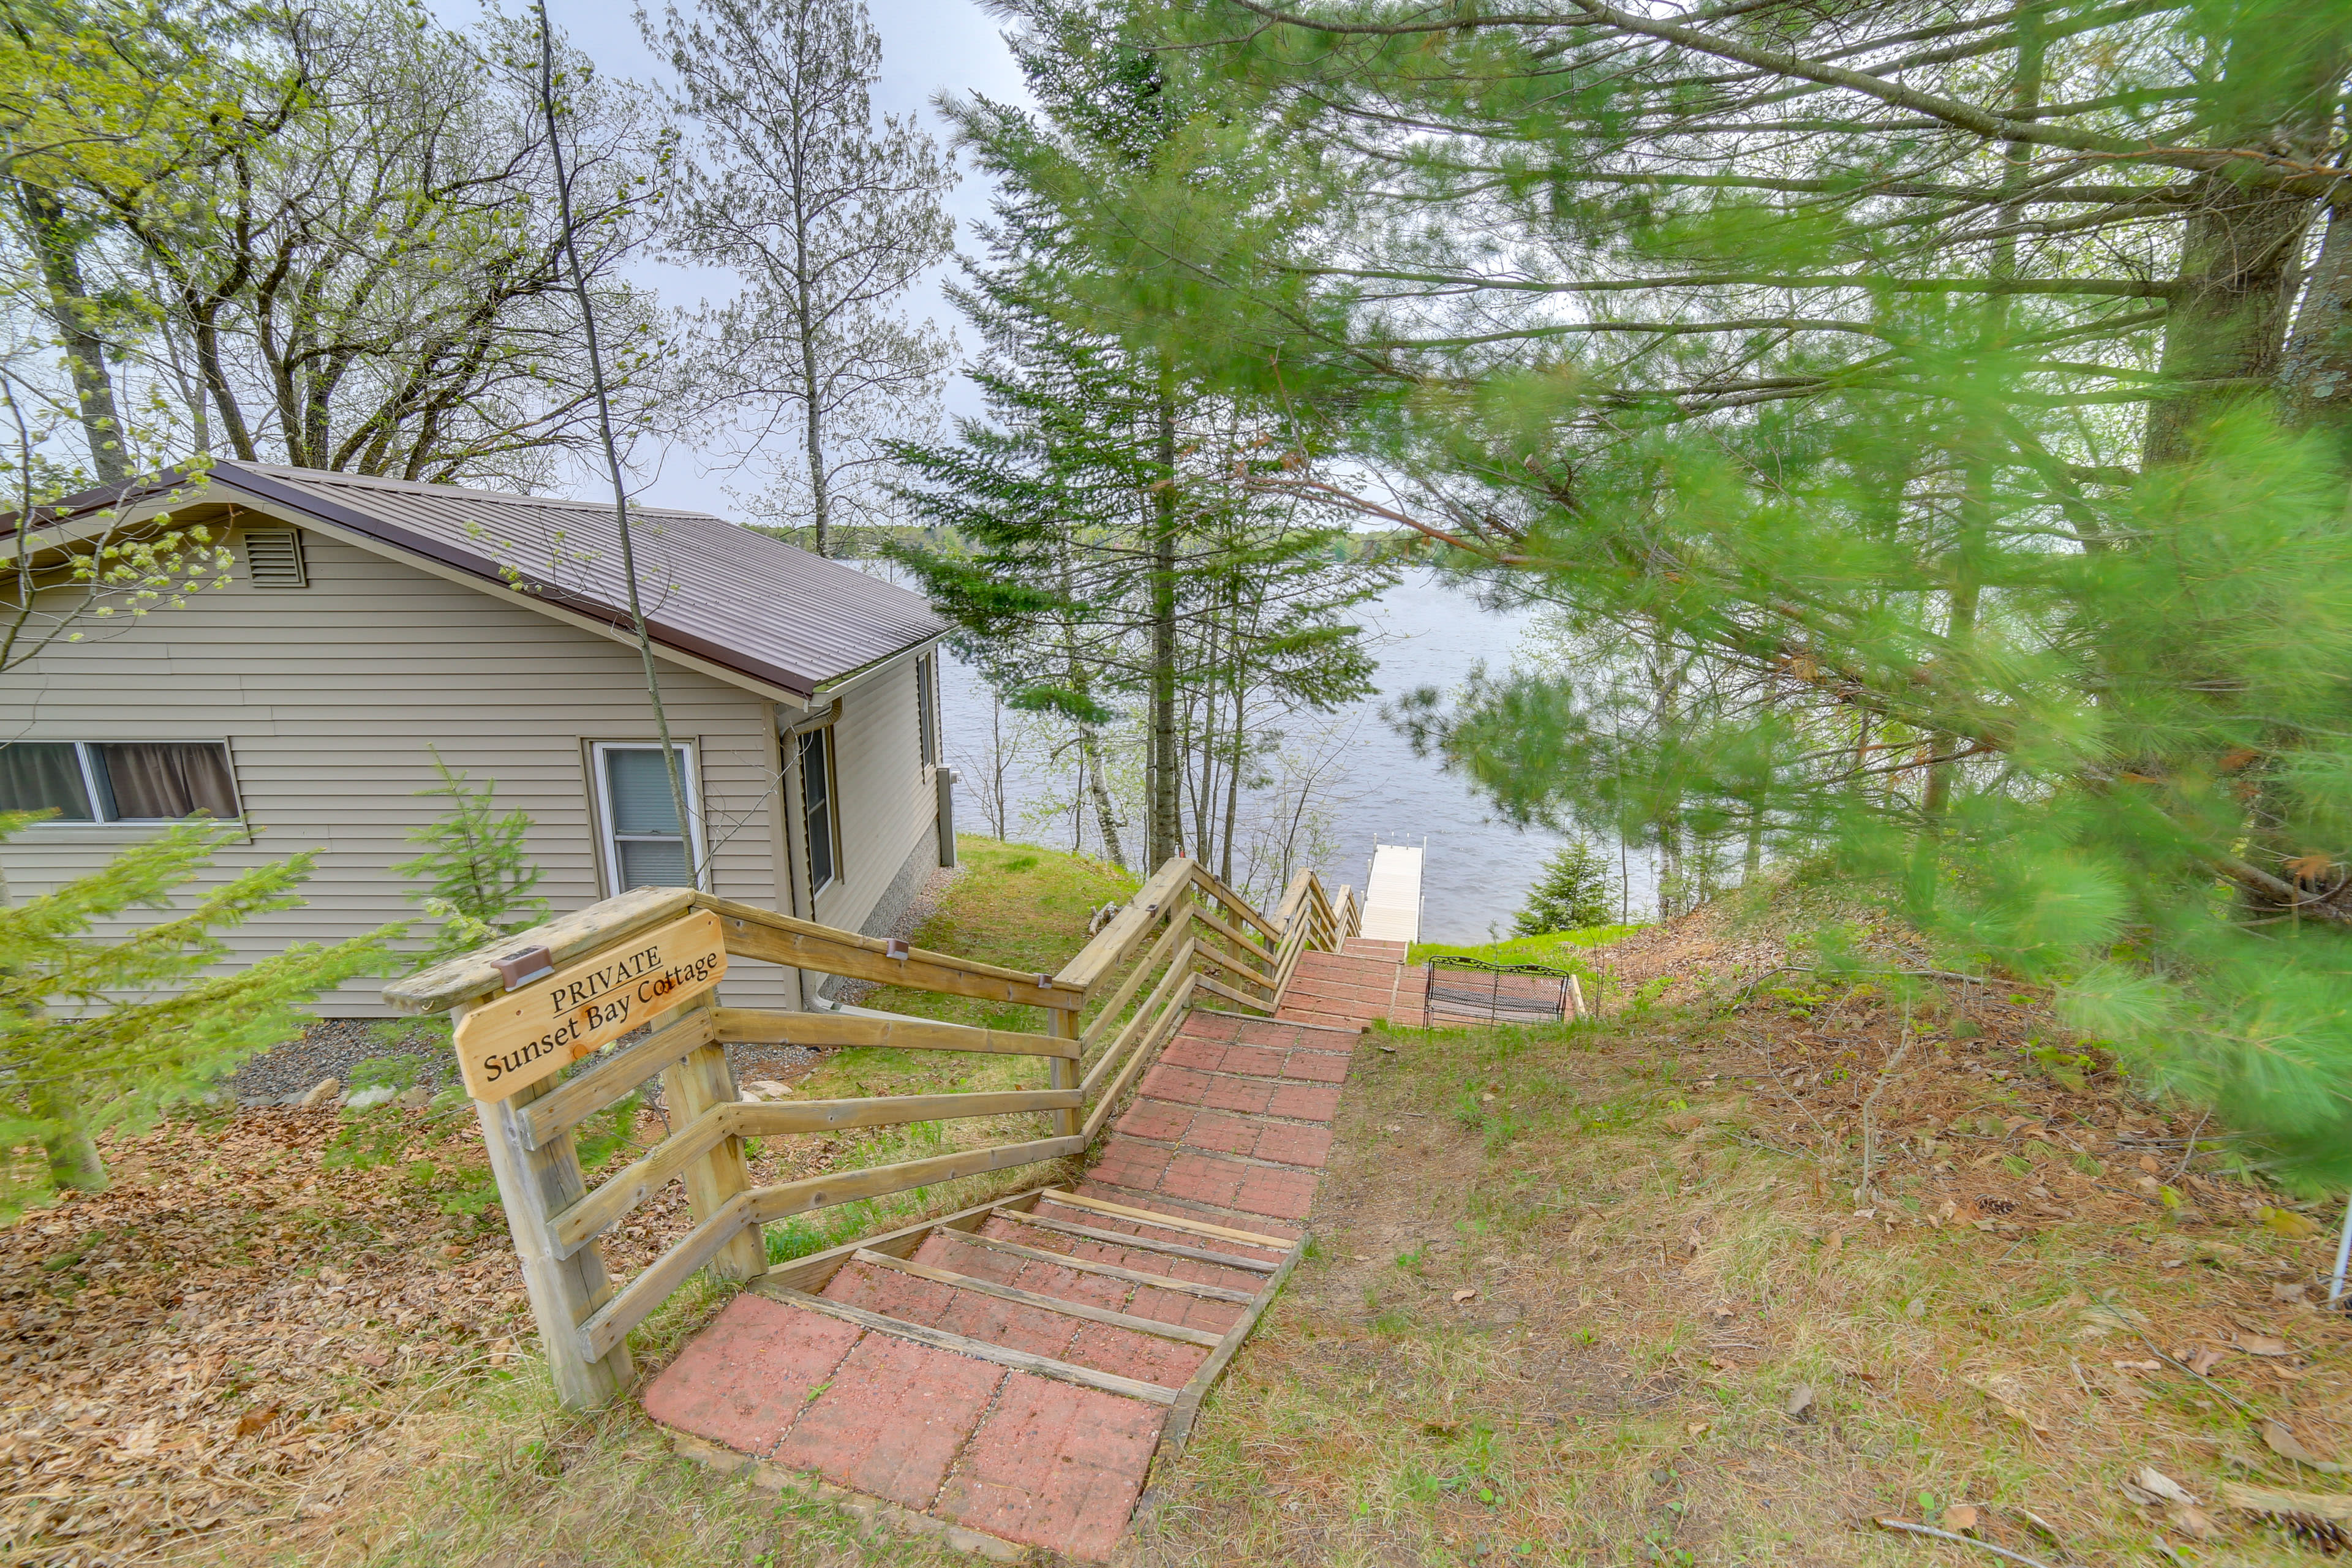 Access to Lake | Private Boat Dock | Fire Pit | Outdoor Dining Areas | Grill